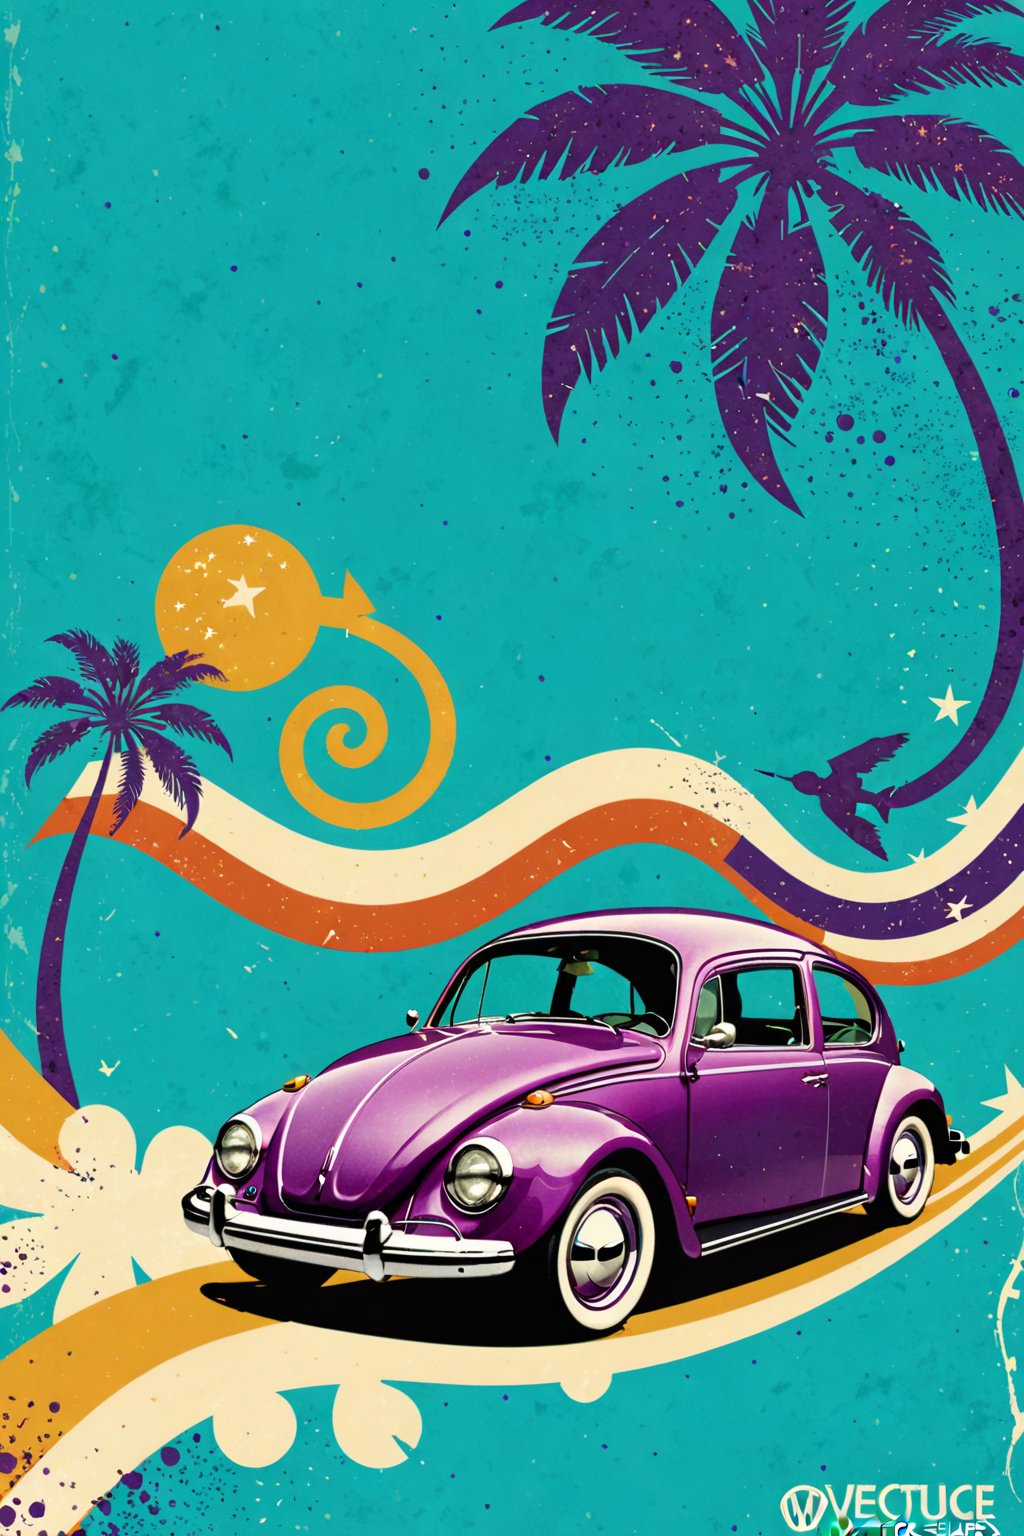 (An amazing and captivating abstract illustration:1.4), purple VW Beetle, veichle focus, motor vehicle, no humans, (grunge style:1.1), (frutiger style:1.3), (colorful:1.3), (2004 aesthetics:1.2). BREAK (beautiful vector shapes:1.3), clouds, swirls, arrow \(symbol\), palm trees, (no text:1.4), (teal gradient background:1.3). BREAK highest quality, sharp details, oversaturated, detailed and intricate, original artwork, trendy, vintage, award-winning, artint, SFW